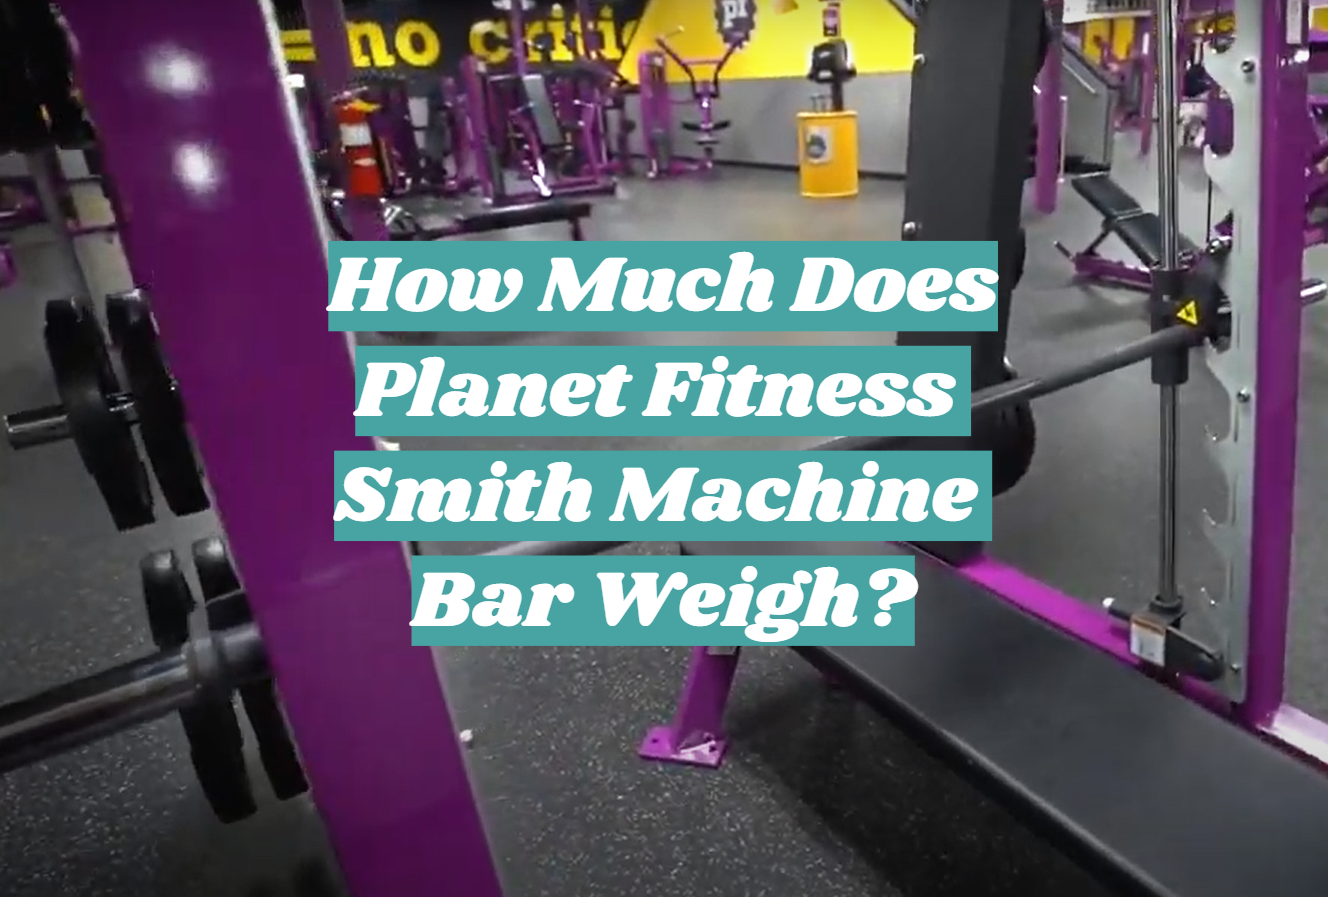 How Much Does Planet Fitness Smith Machine Bar Weigh?